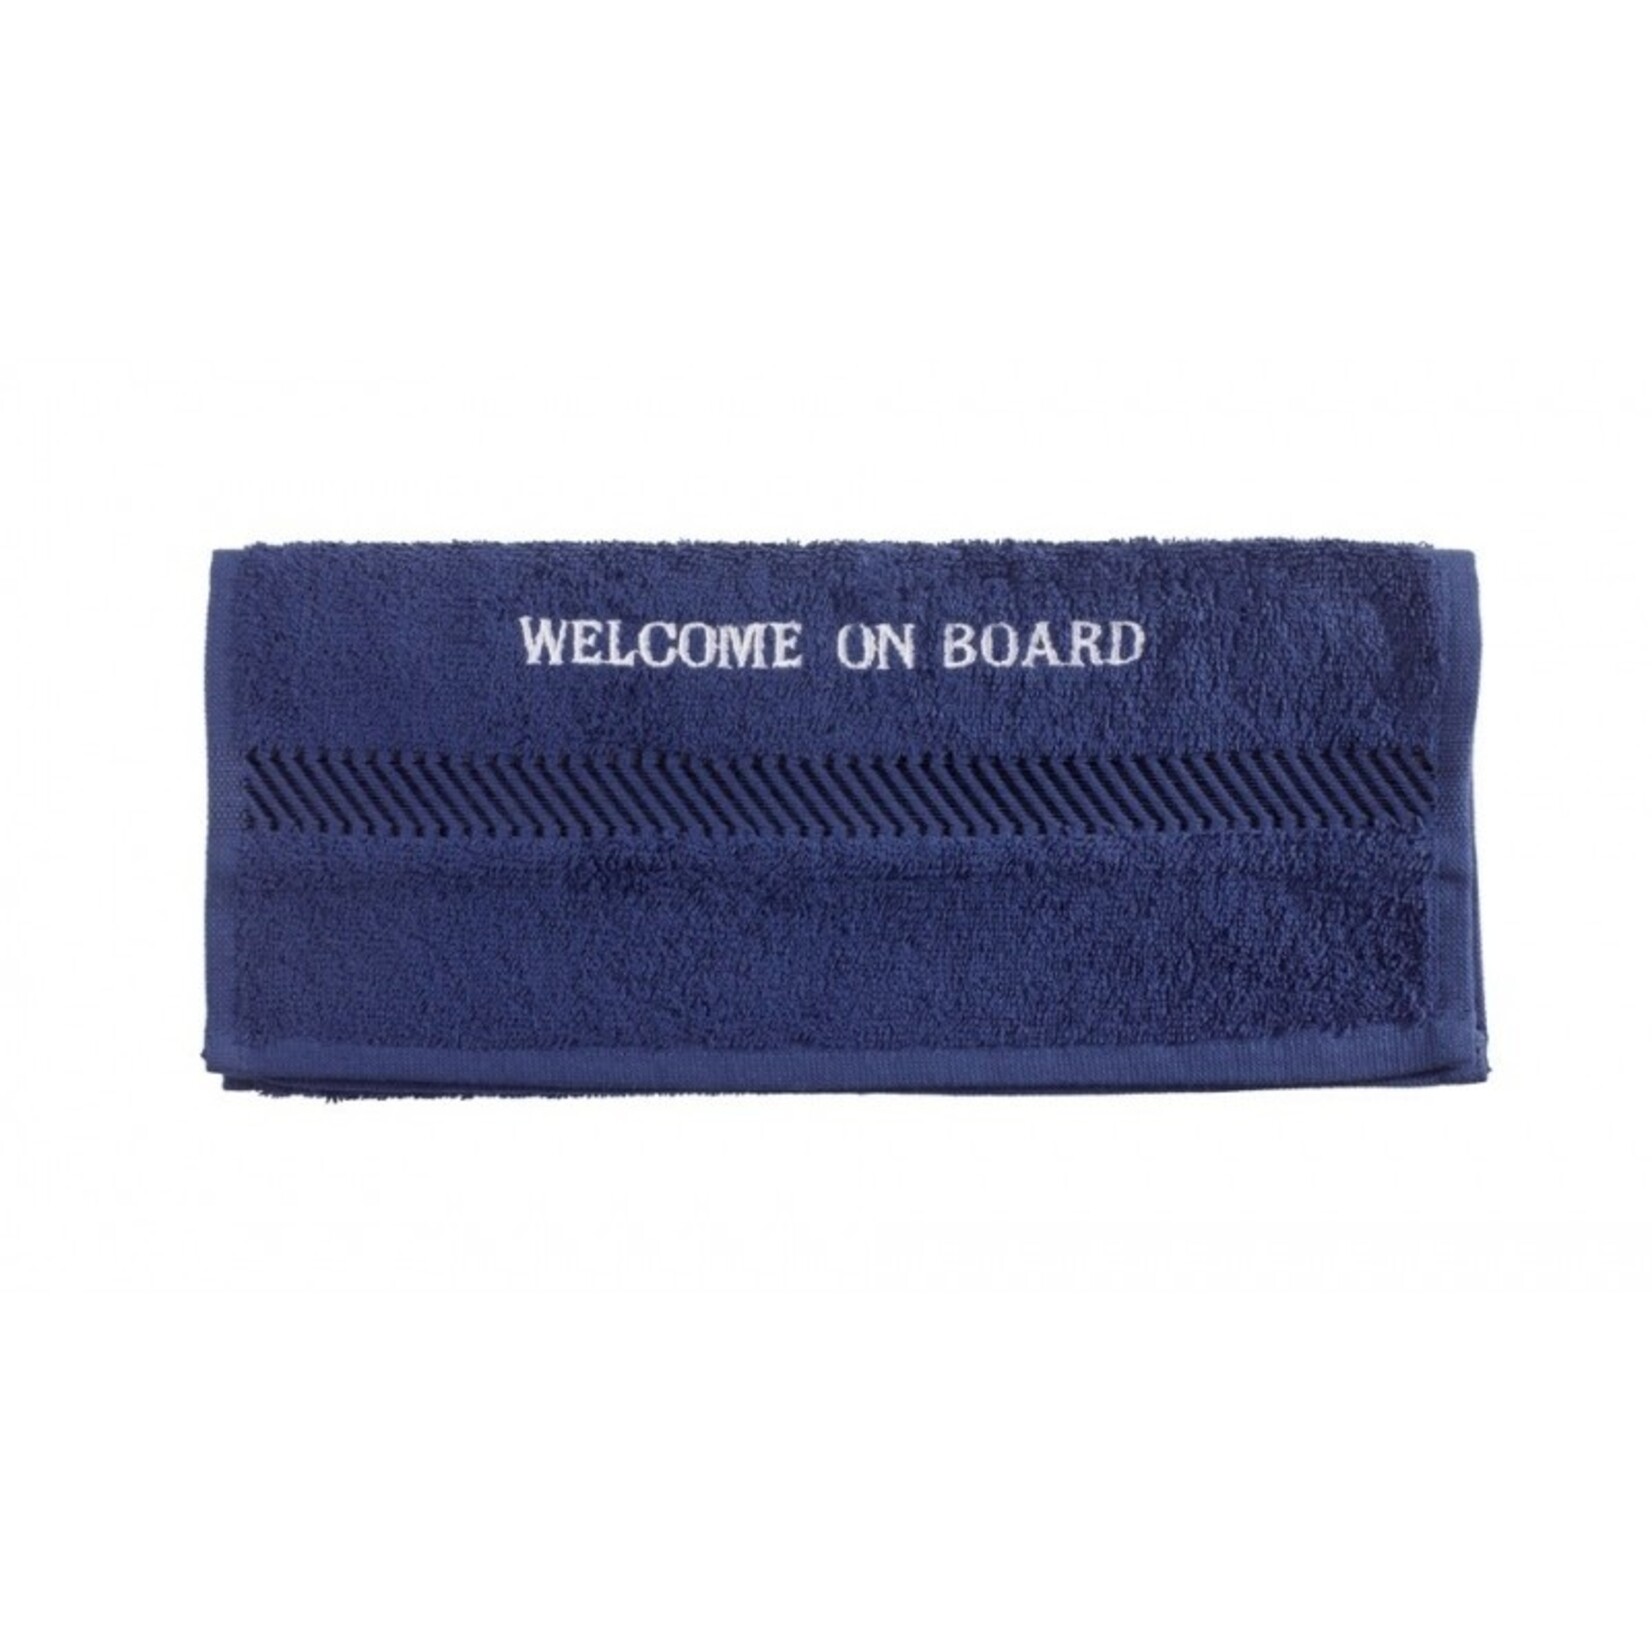 Guesr towel Welcome on board embroidered 30 x 50 cm navy